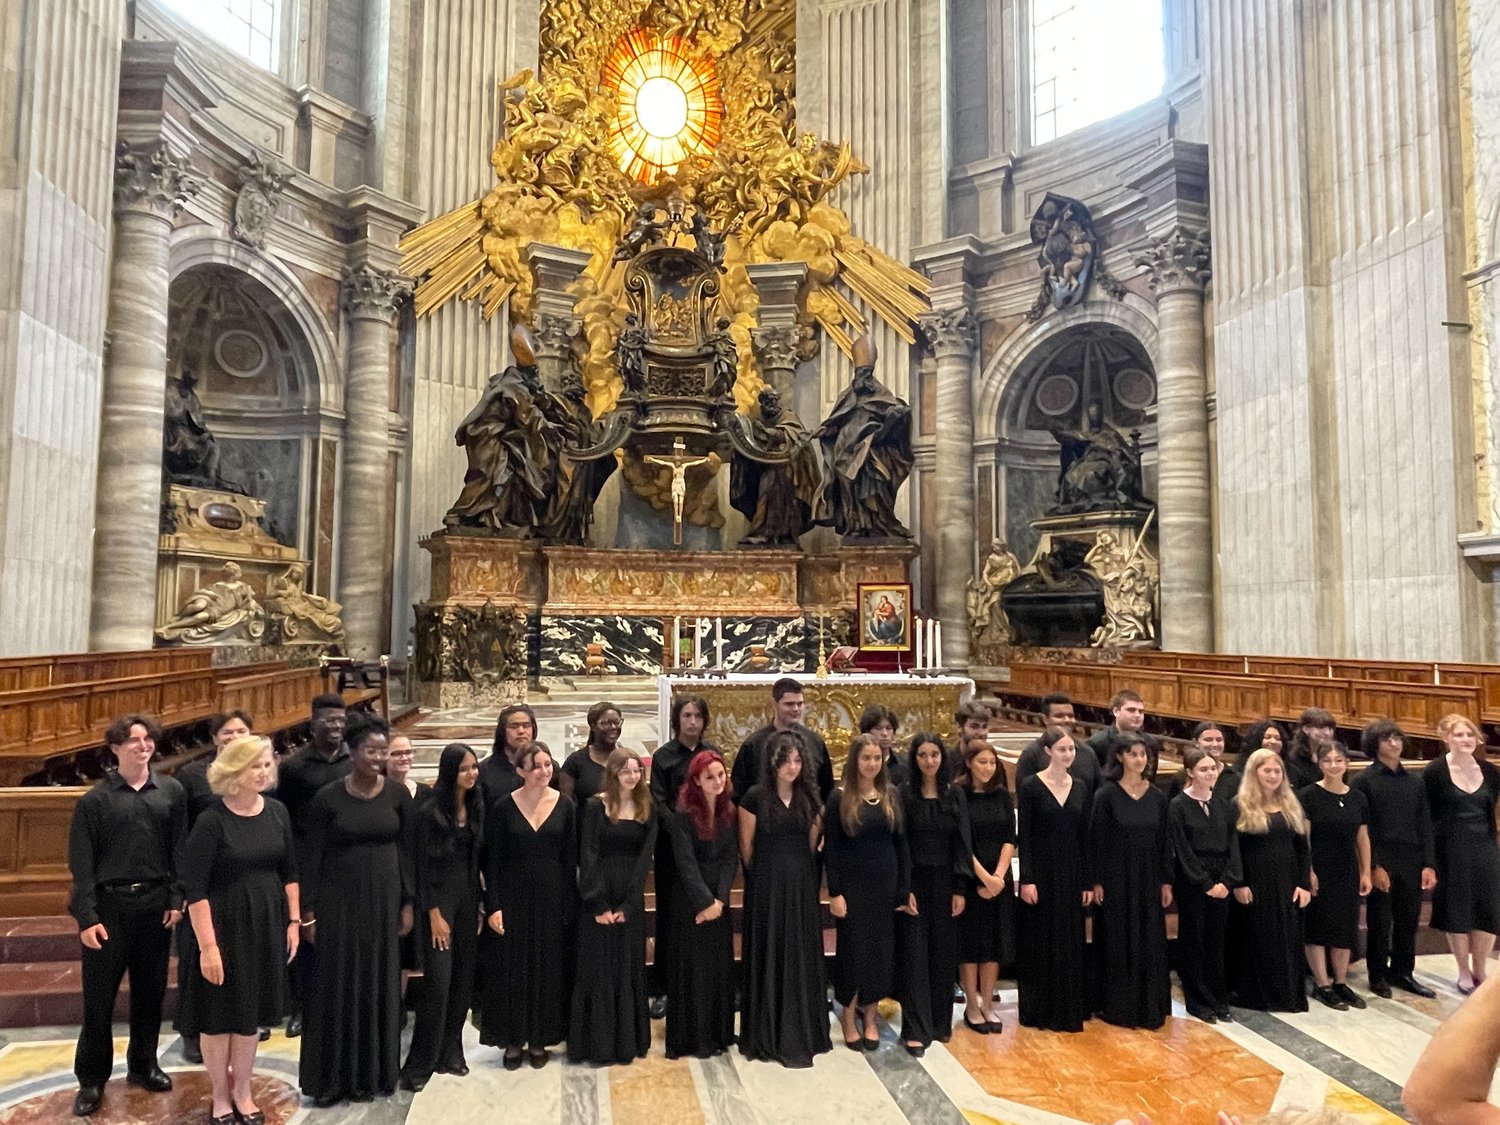 The Metropolitan Youth Orchestra sang at St. Peter’s Basilica in the Vatican on July 18.